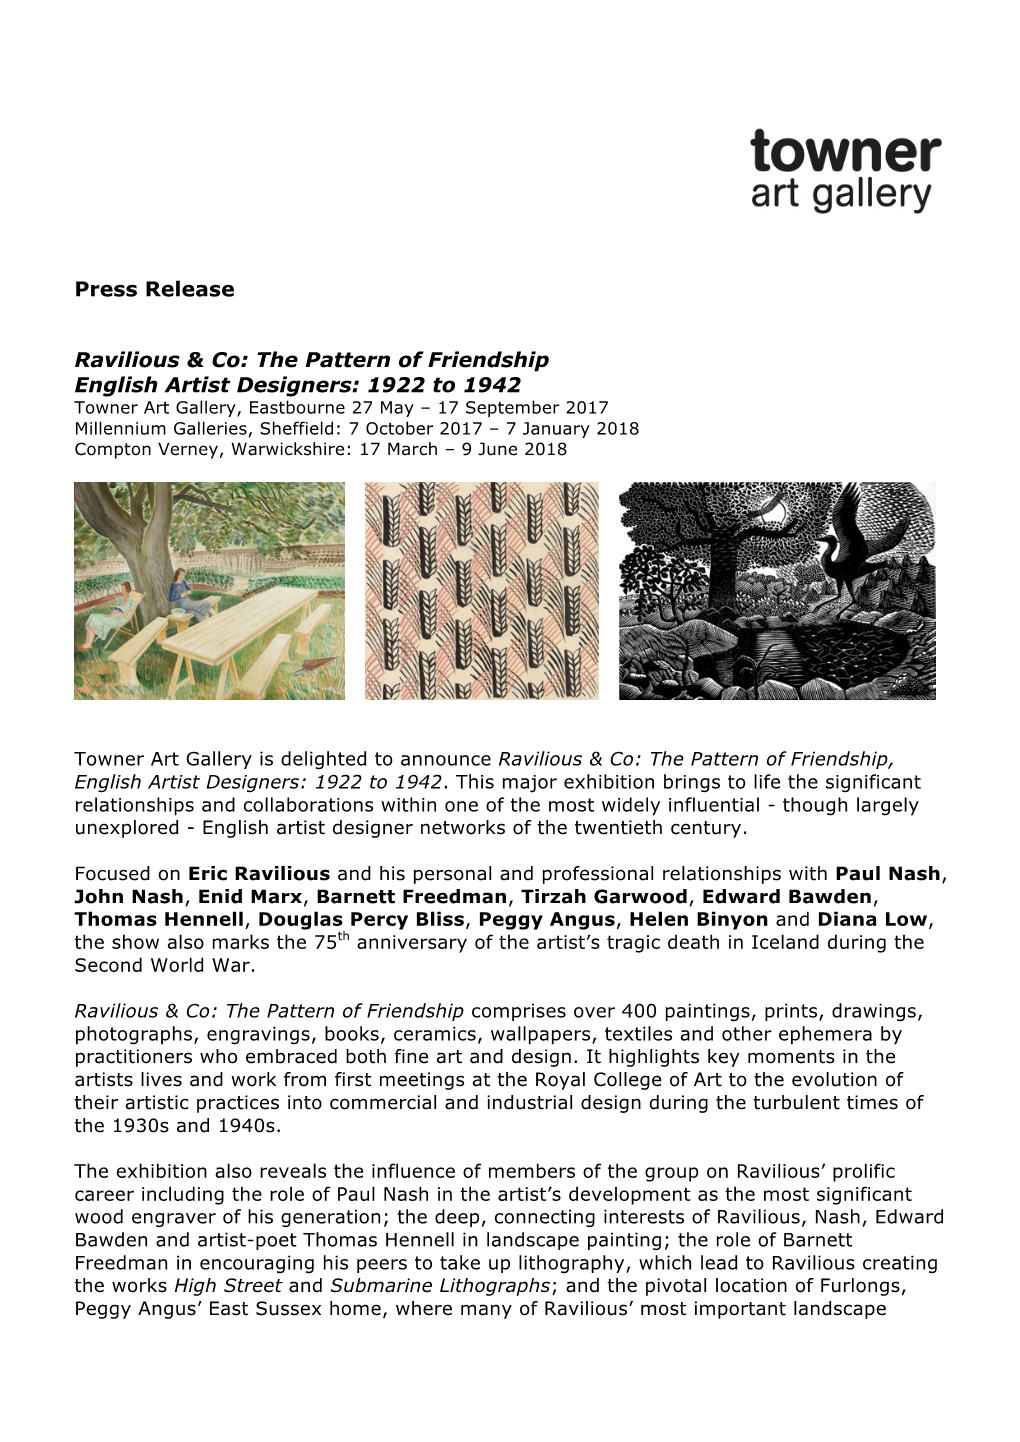 Press Release Ravilious & Co: the Pattern of Friendship English Artist